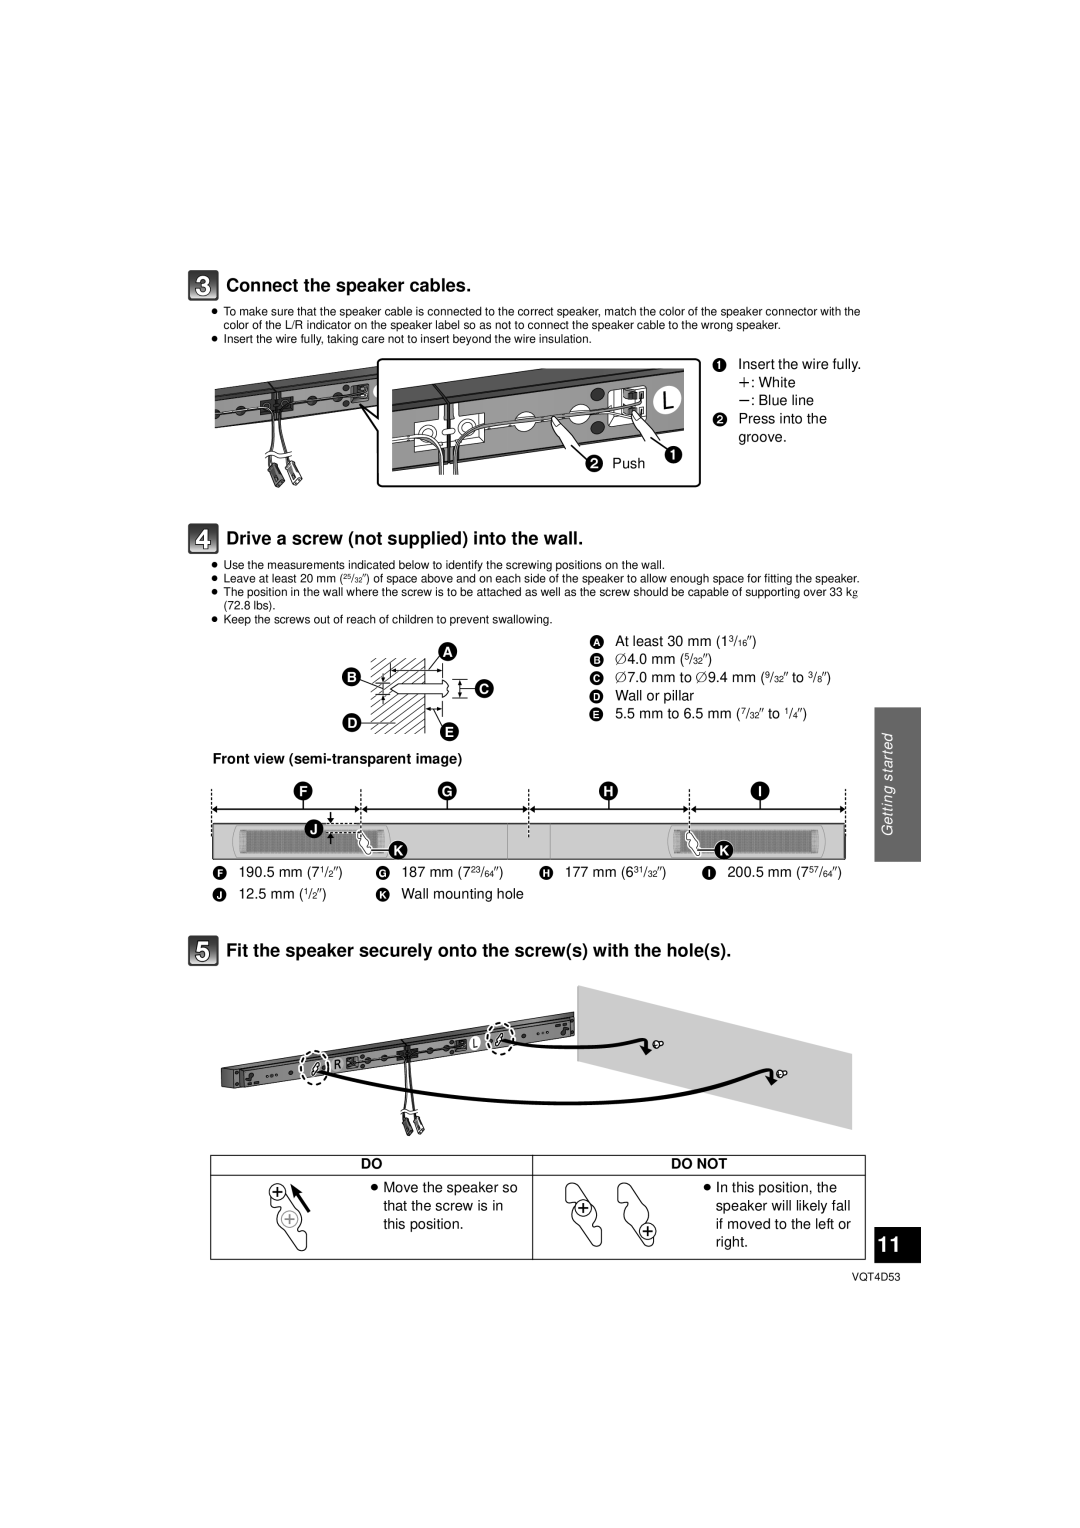 Panasonic SC-HTB20 owner manual  , Drive a screw not supplied into the wall, Getting started, Do Not 